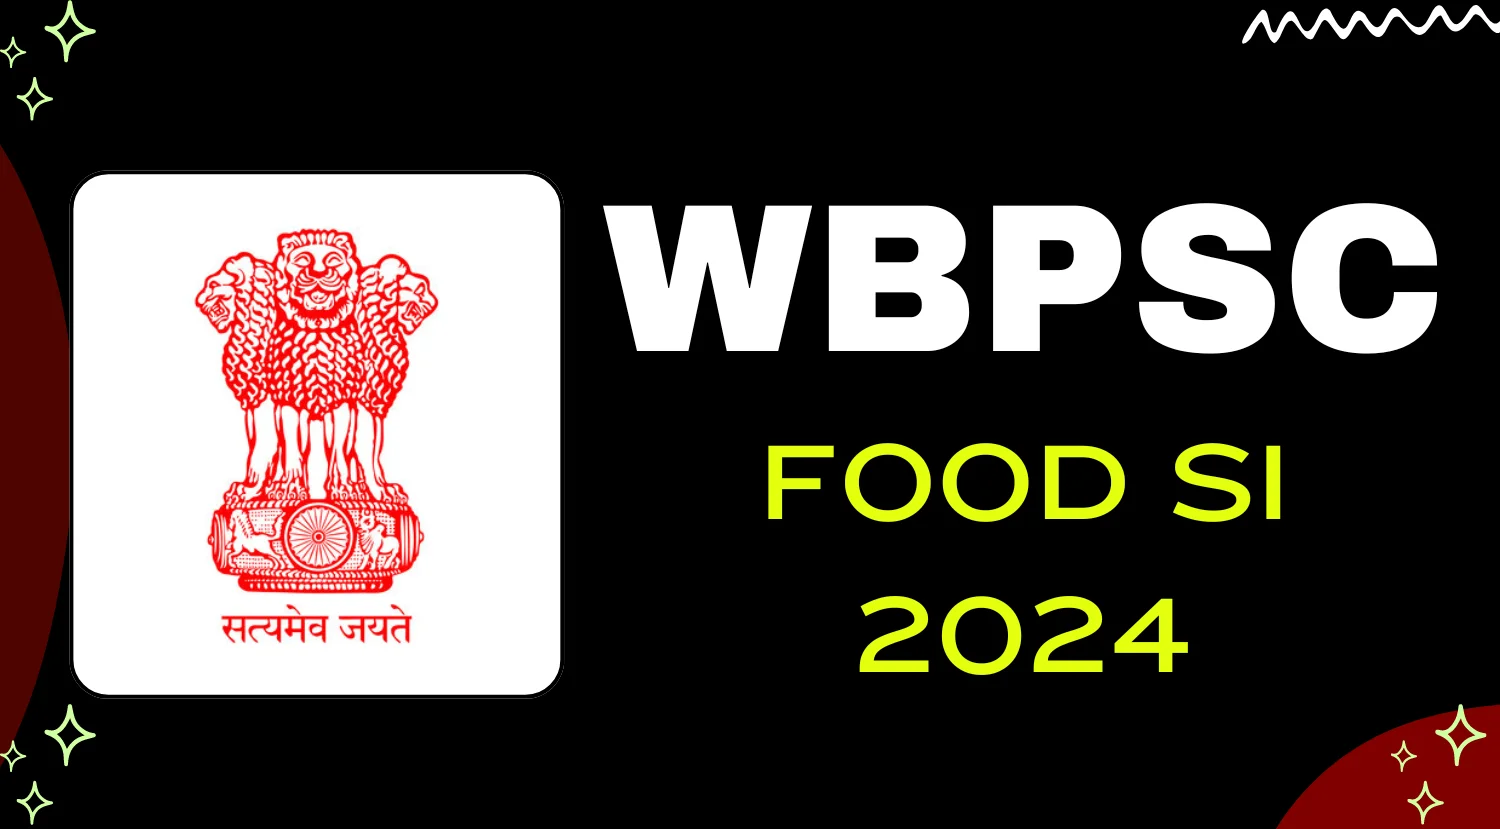 WBPSC FOOD SI 2024 NEWS